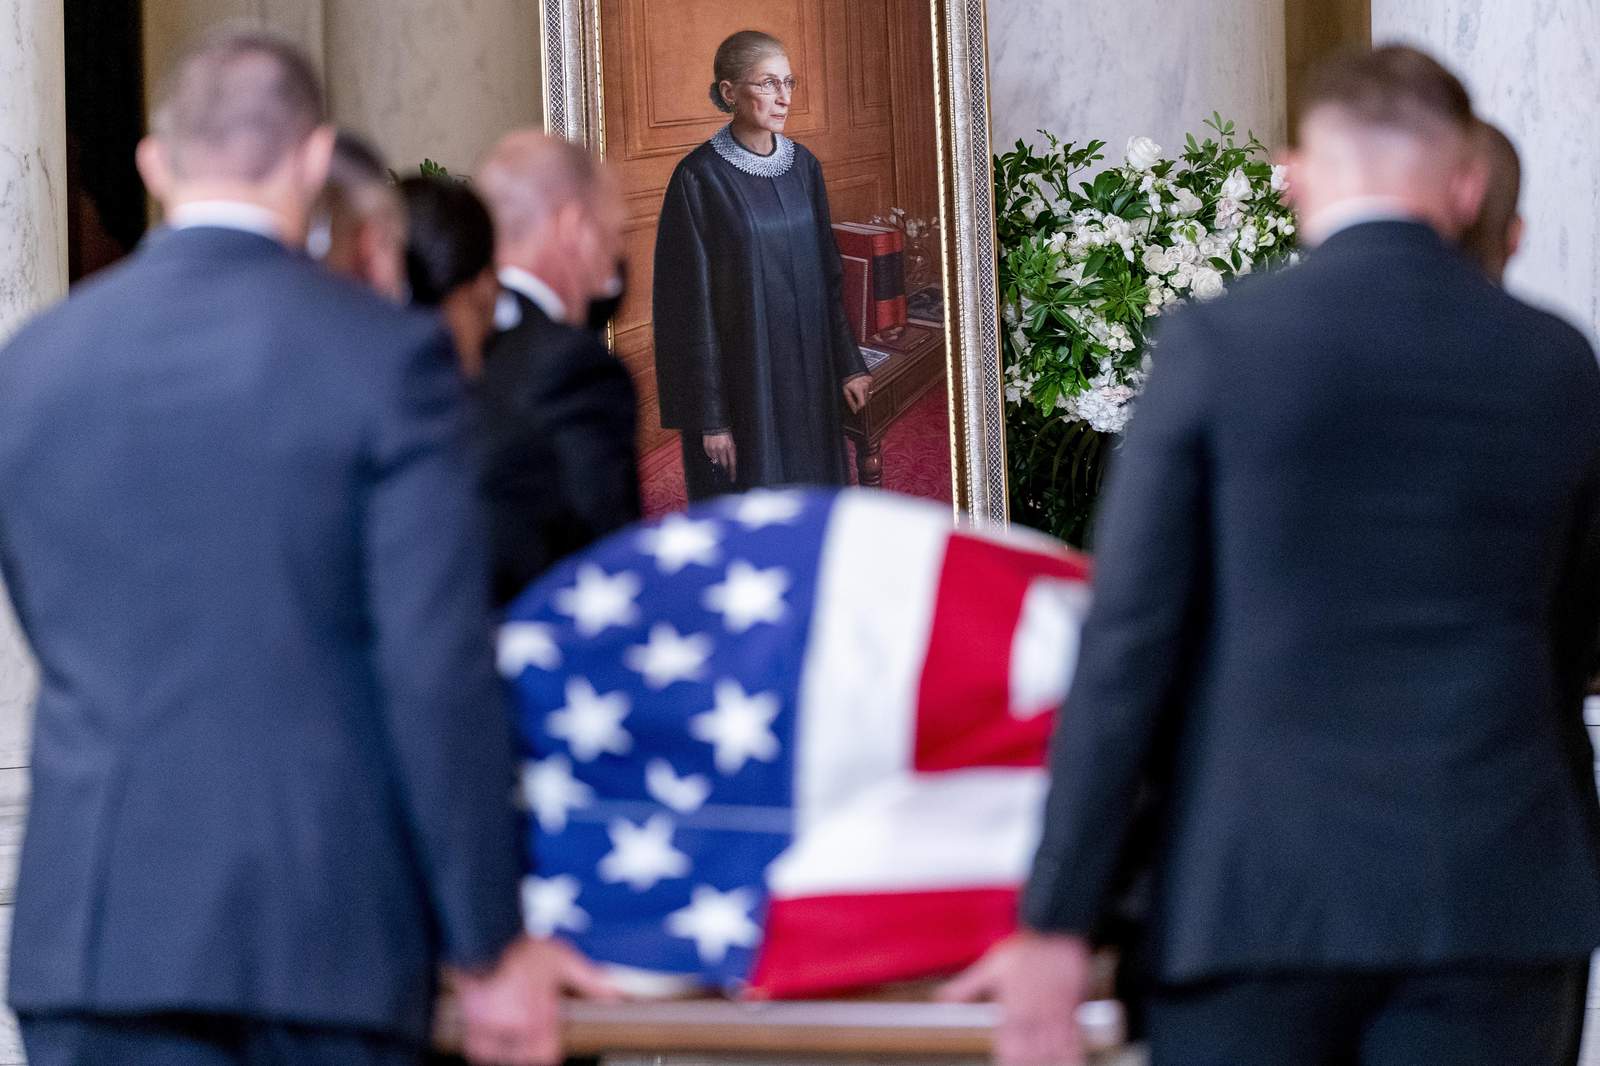 Long lines of mourners pay respects to Ginsburg at court